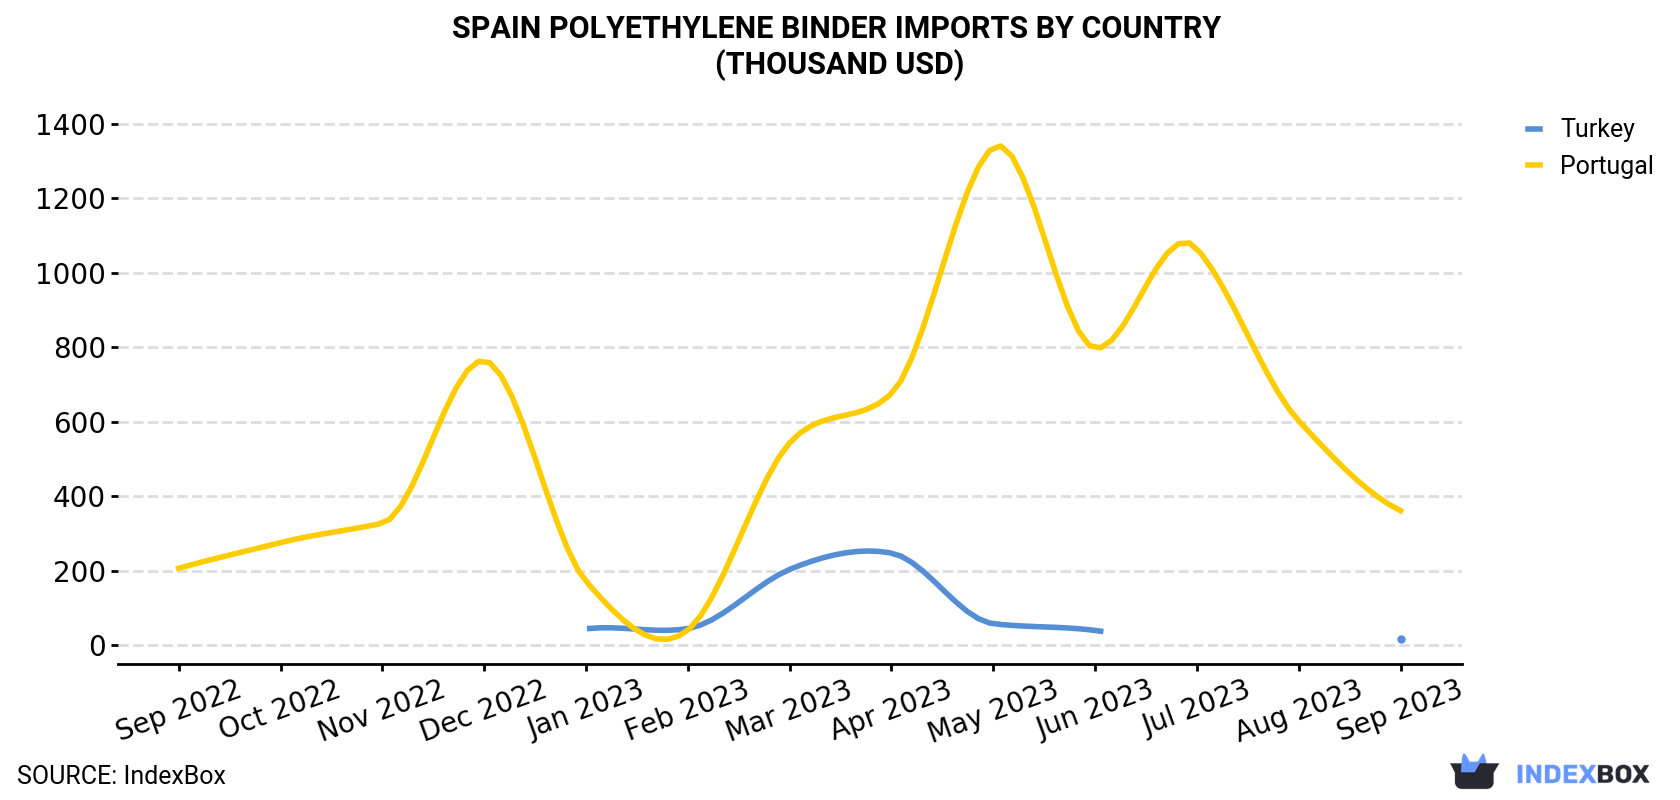 Spain Polyethylene Binder Imports By Country (Thousand USD)